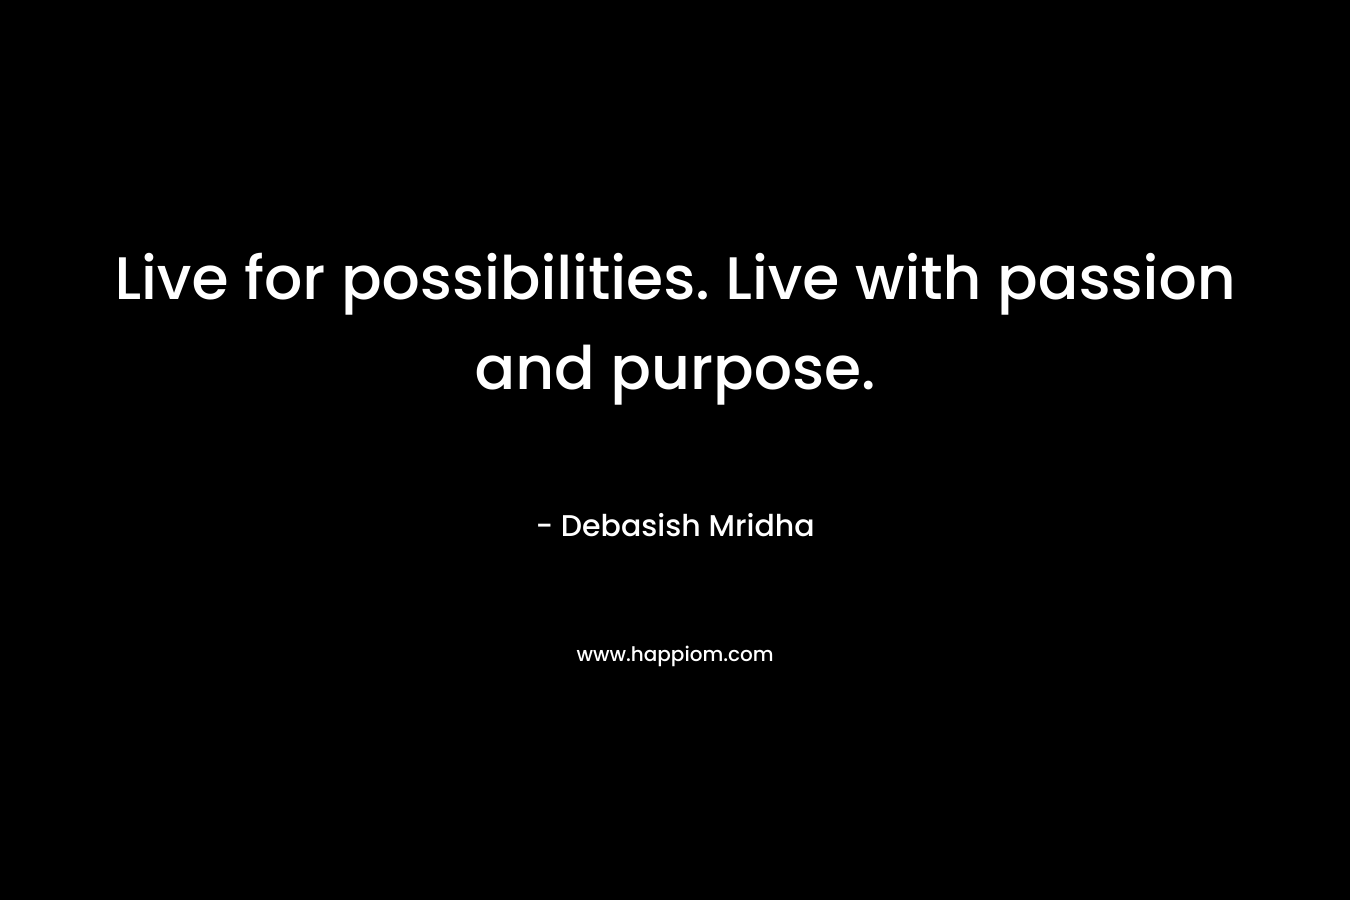 Live for possibilities. Live with passion and purpose.